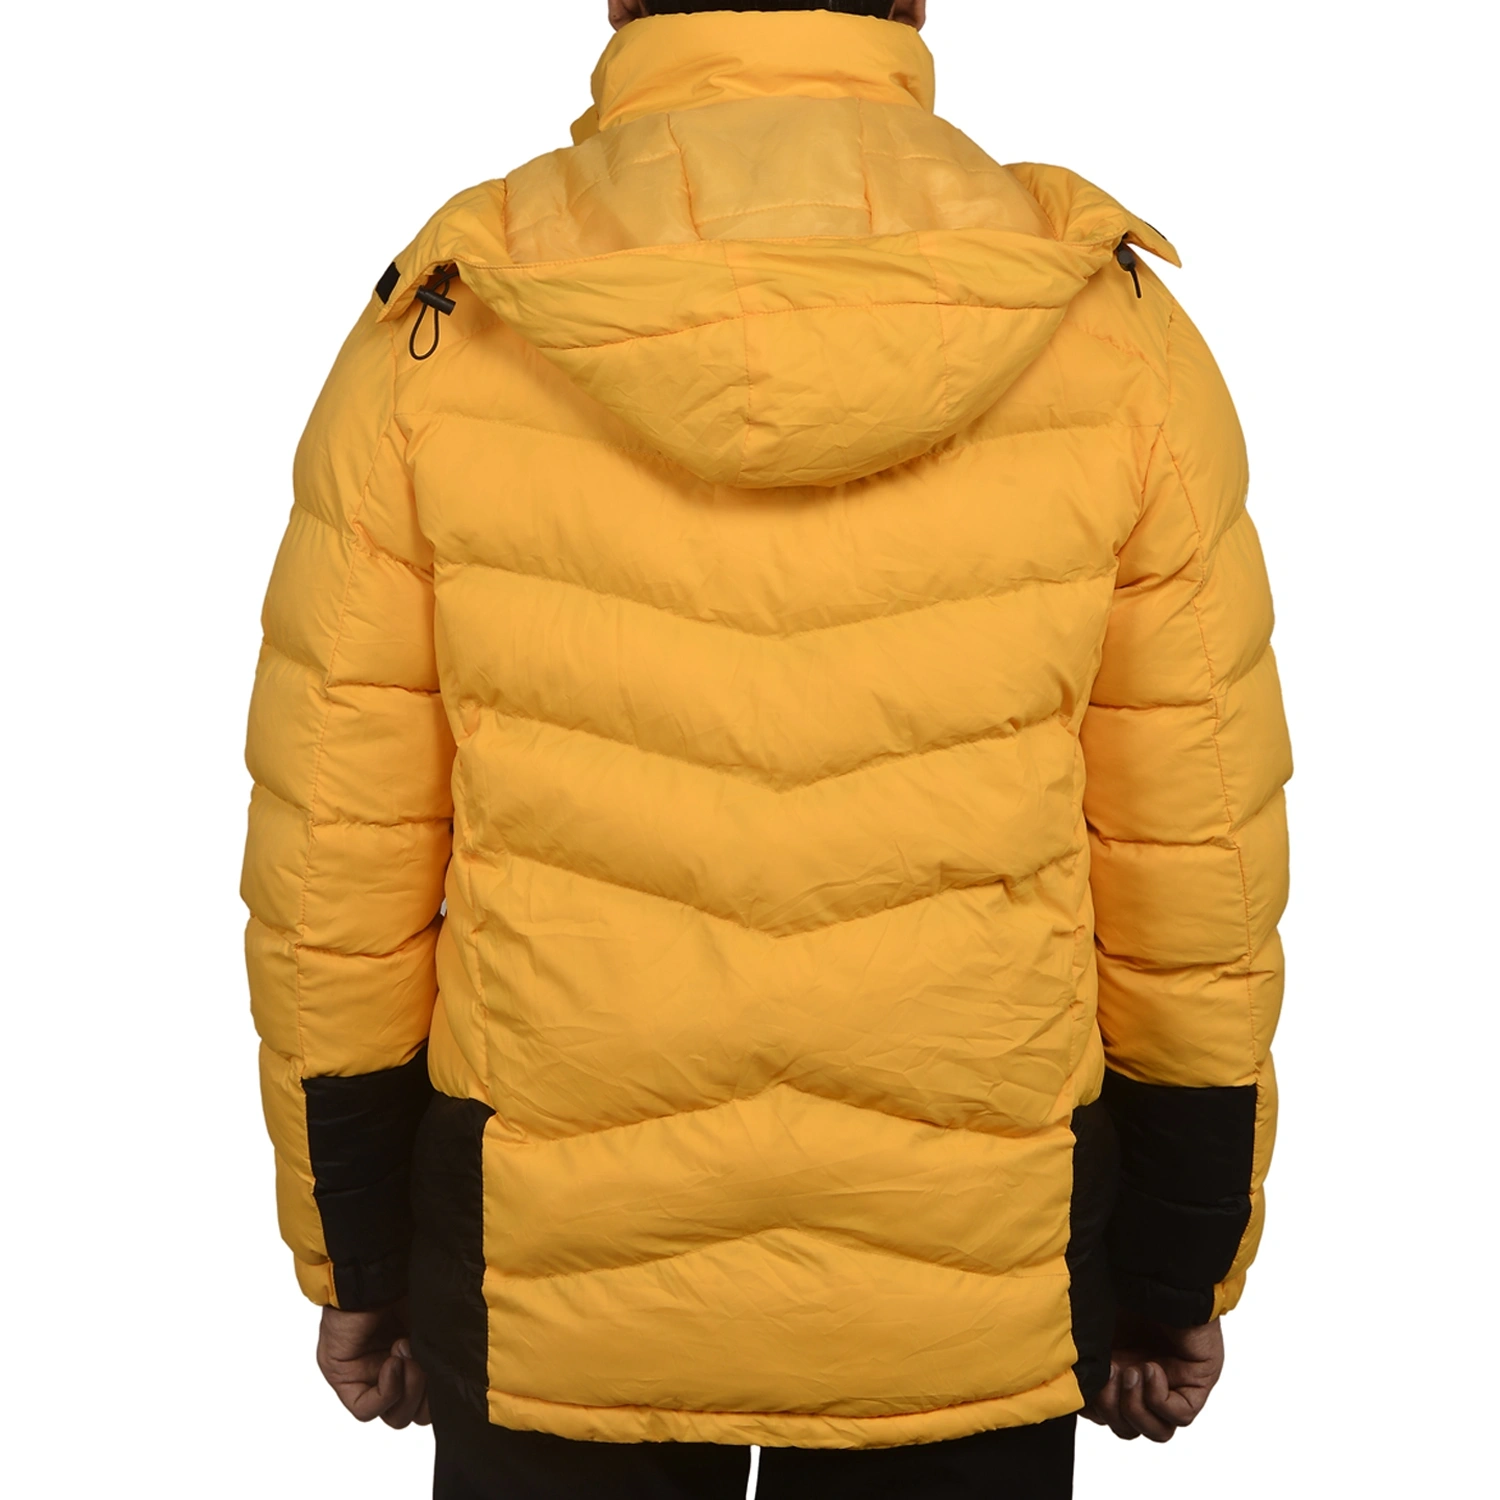 K2 Survivor Down Jacket for Men: Stylized Functionality for Extreme Cold Weather Expeditions (Up to -20°C)-M-Yellow-4